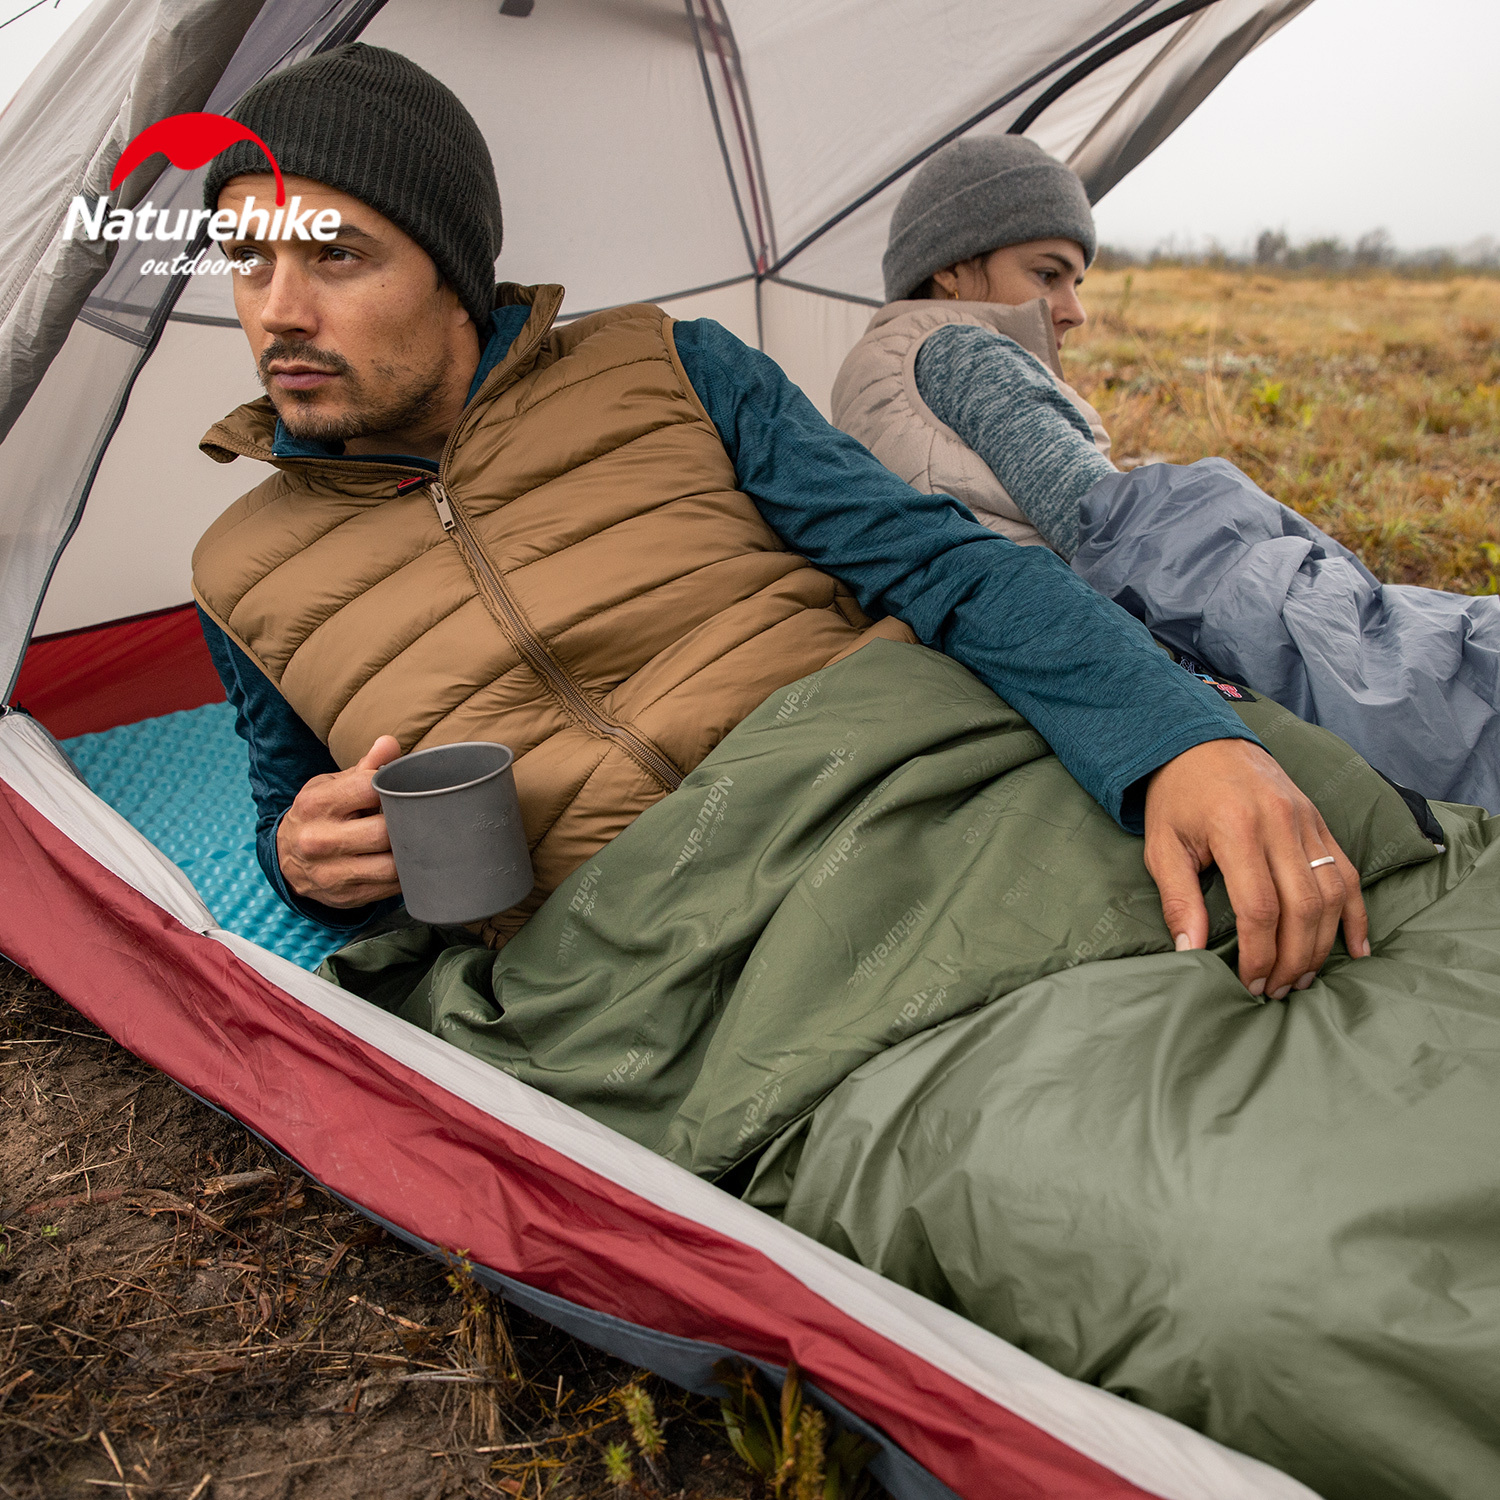 

Naturehike Ultralight Lw180 Waterproof Cotton Sleeping Bag - Perfect For Summer Hiking, Camping, And Super Sunday Parties!